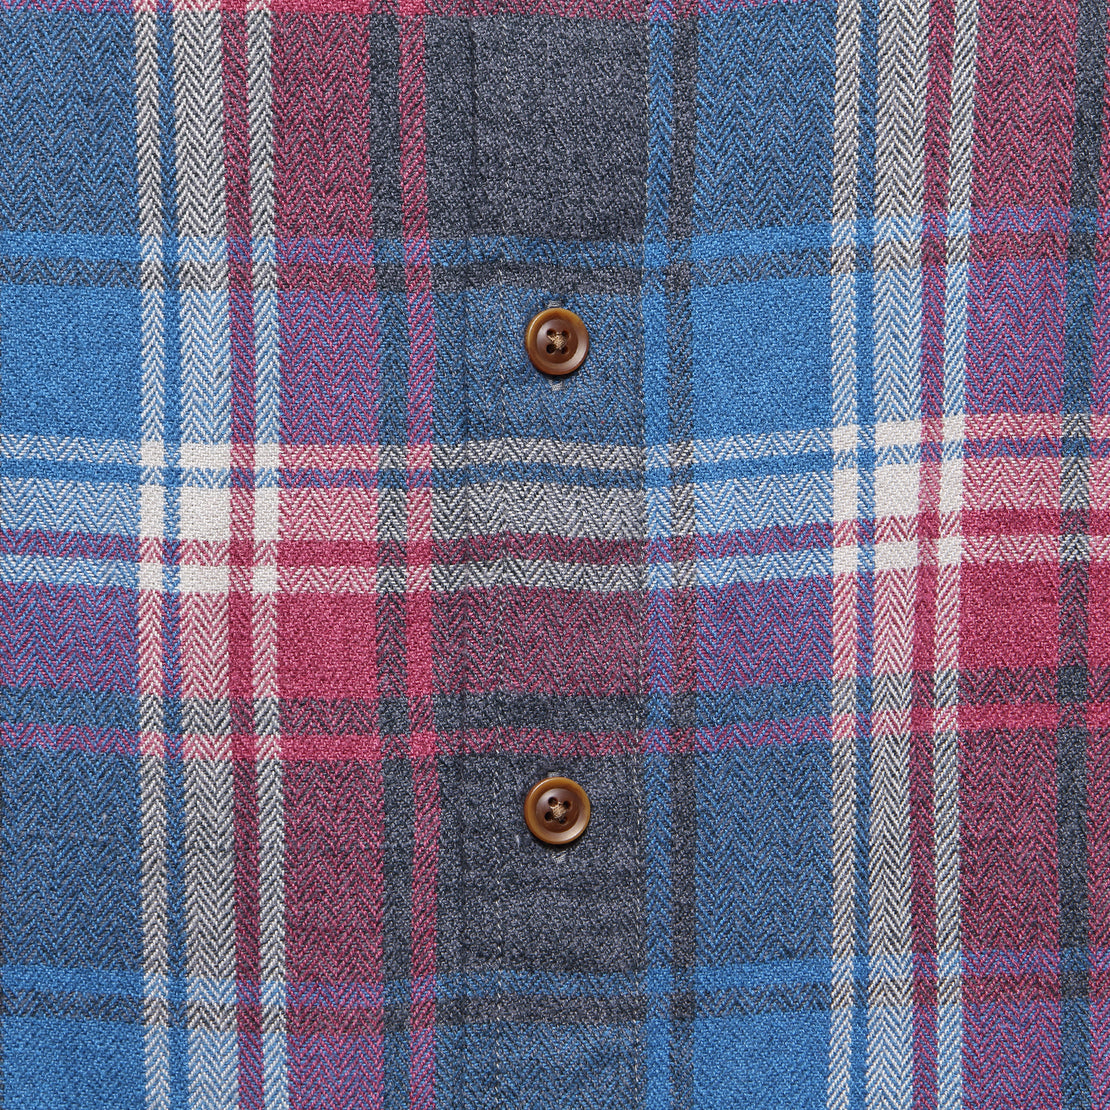 Yarmouth 3-Ply Jaspe Flannel - Violet/Gray/Blue - Grayers - STAG Provisions - Tops - L/S Woven - Plaid